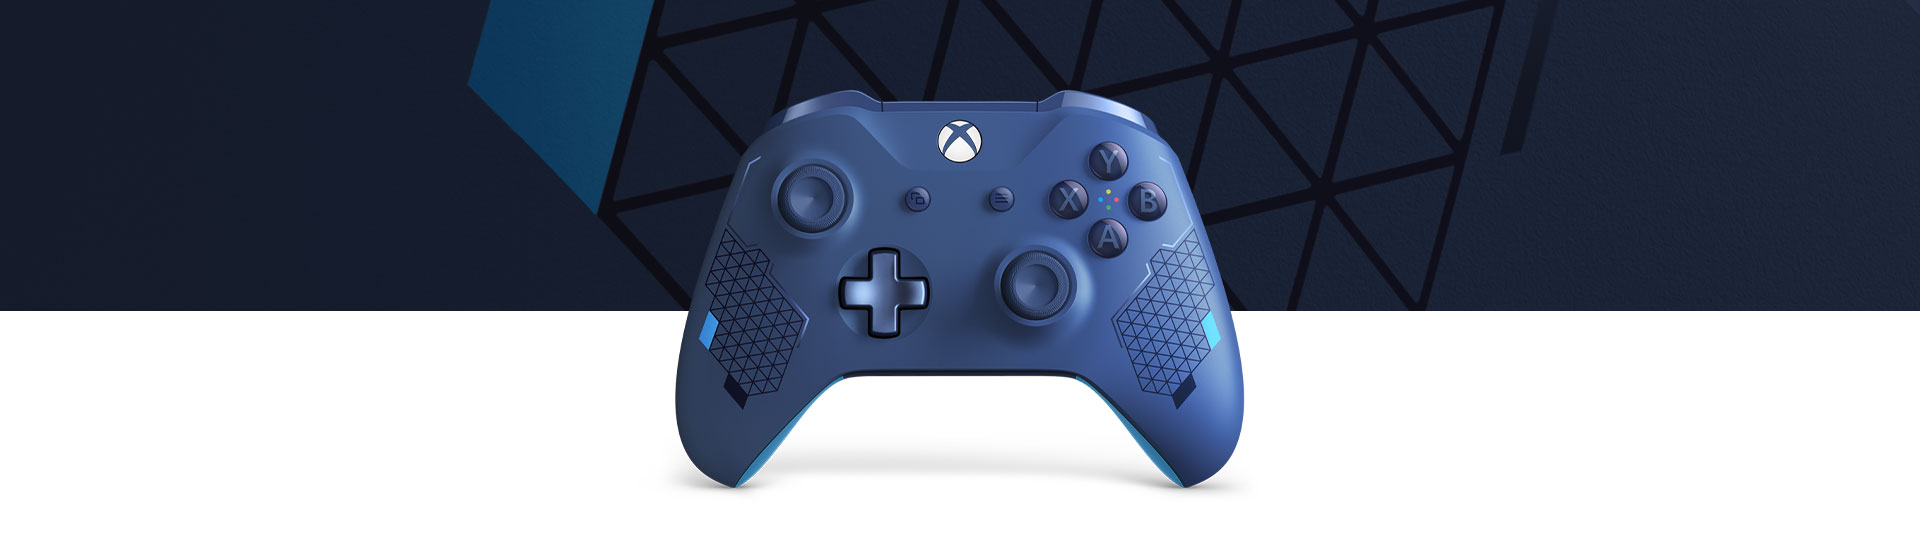 official xbox one special edn wireless controller sport blue